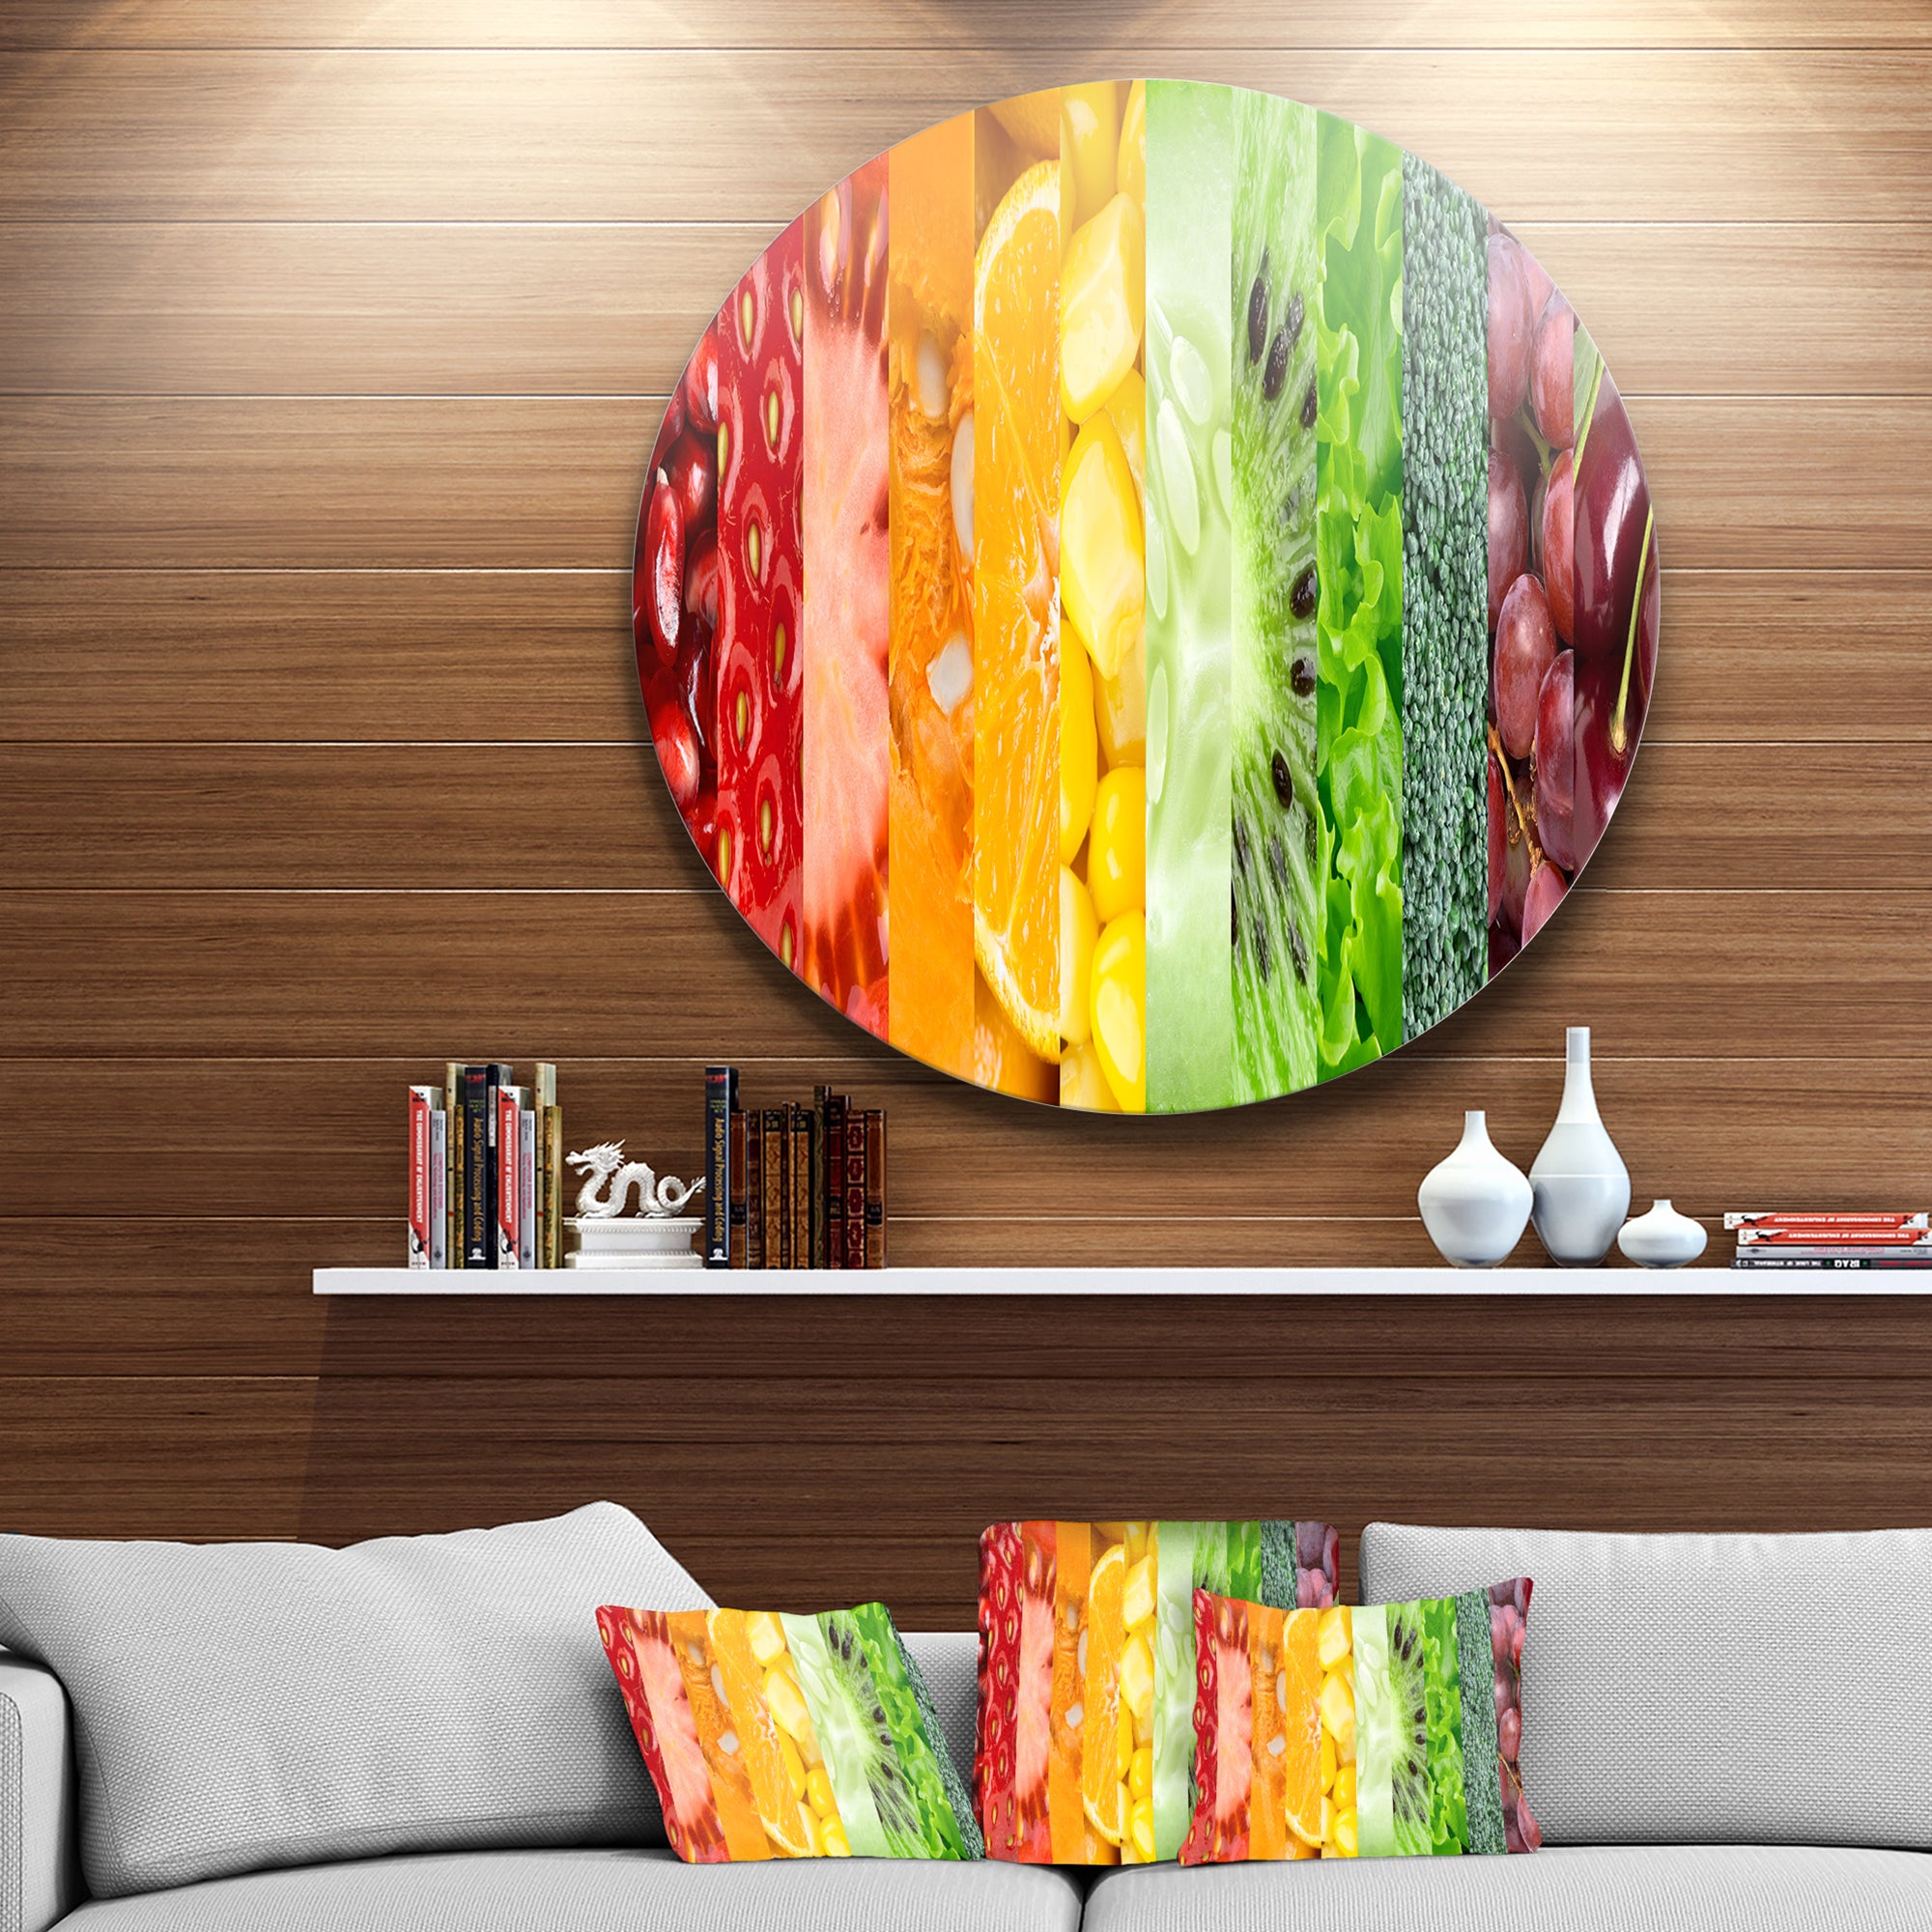 Fruits Berries and Vegie Collage' Floral Circle Metal Wall Art